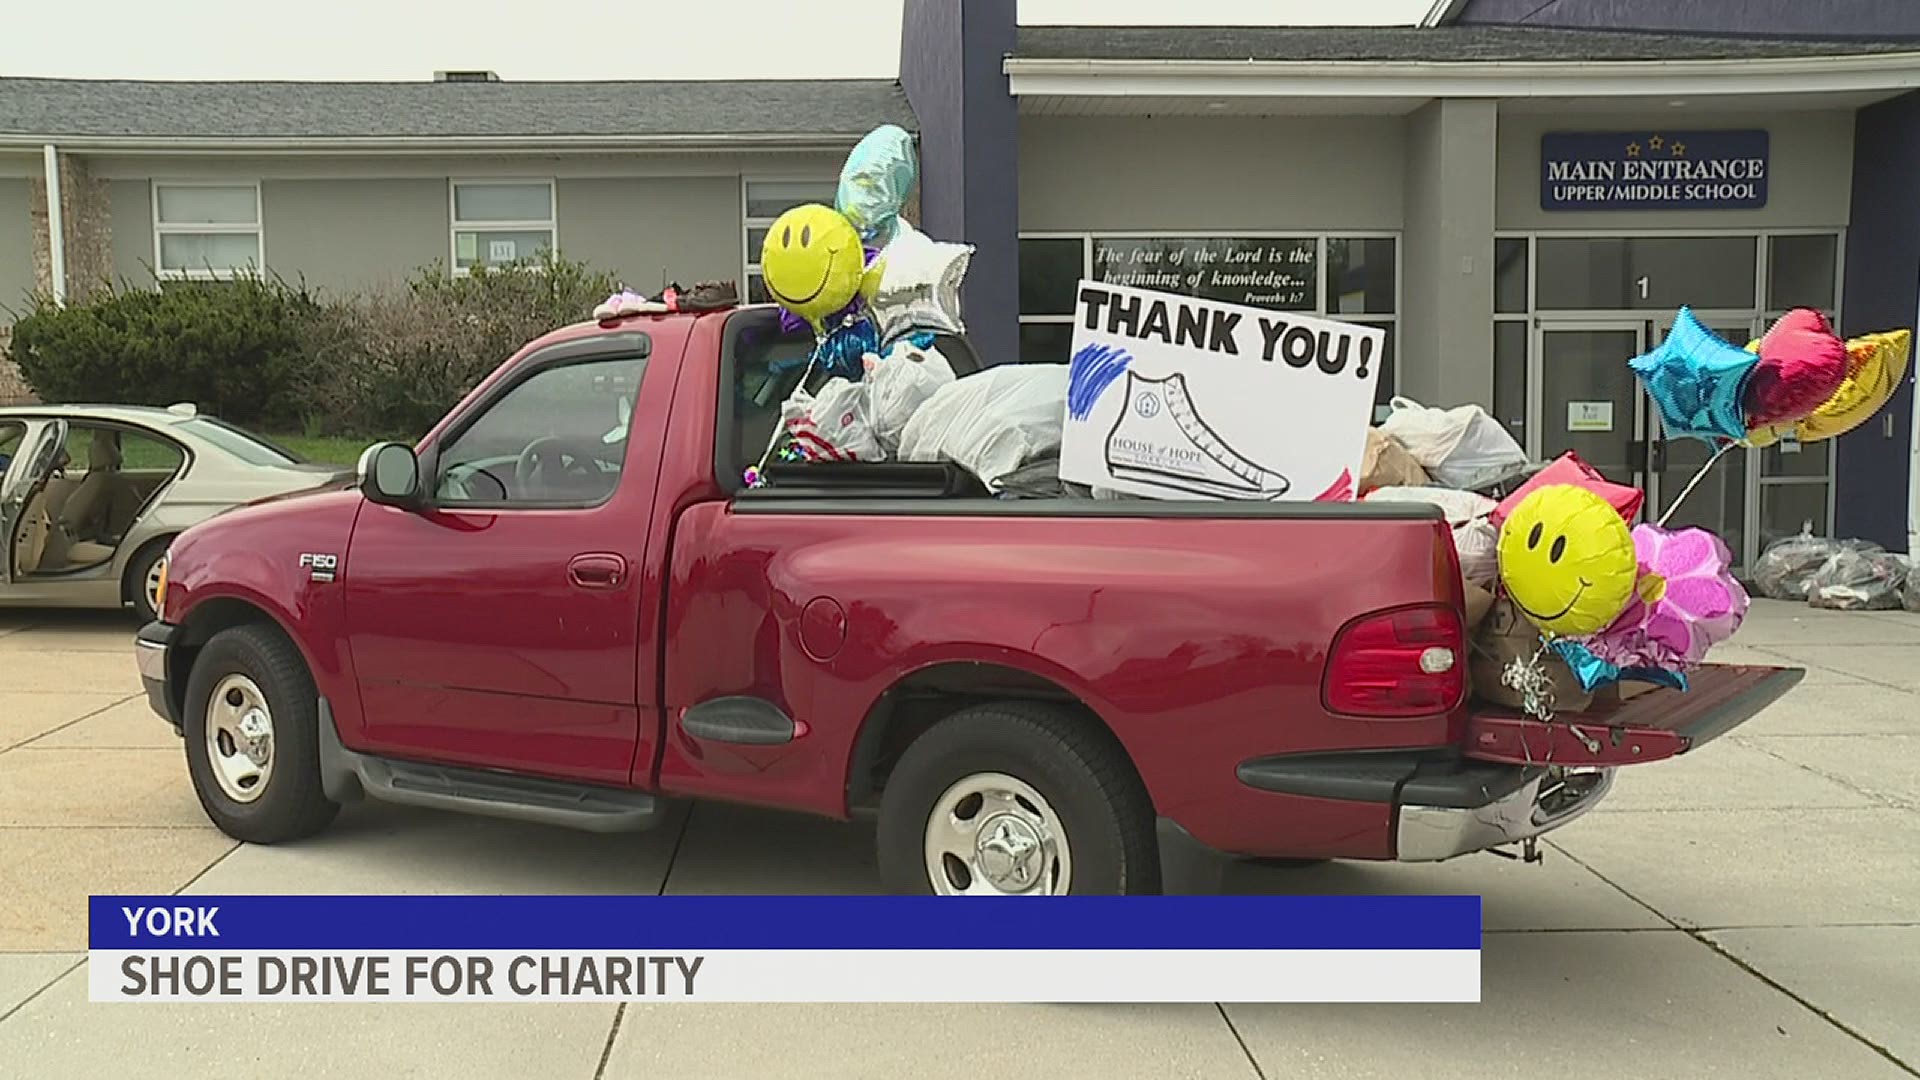 New and used shoe donations will help raise money for House of Hope York.